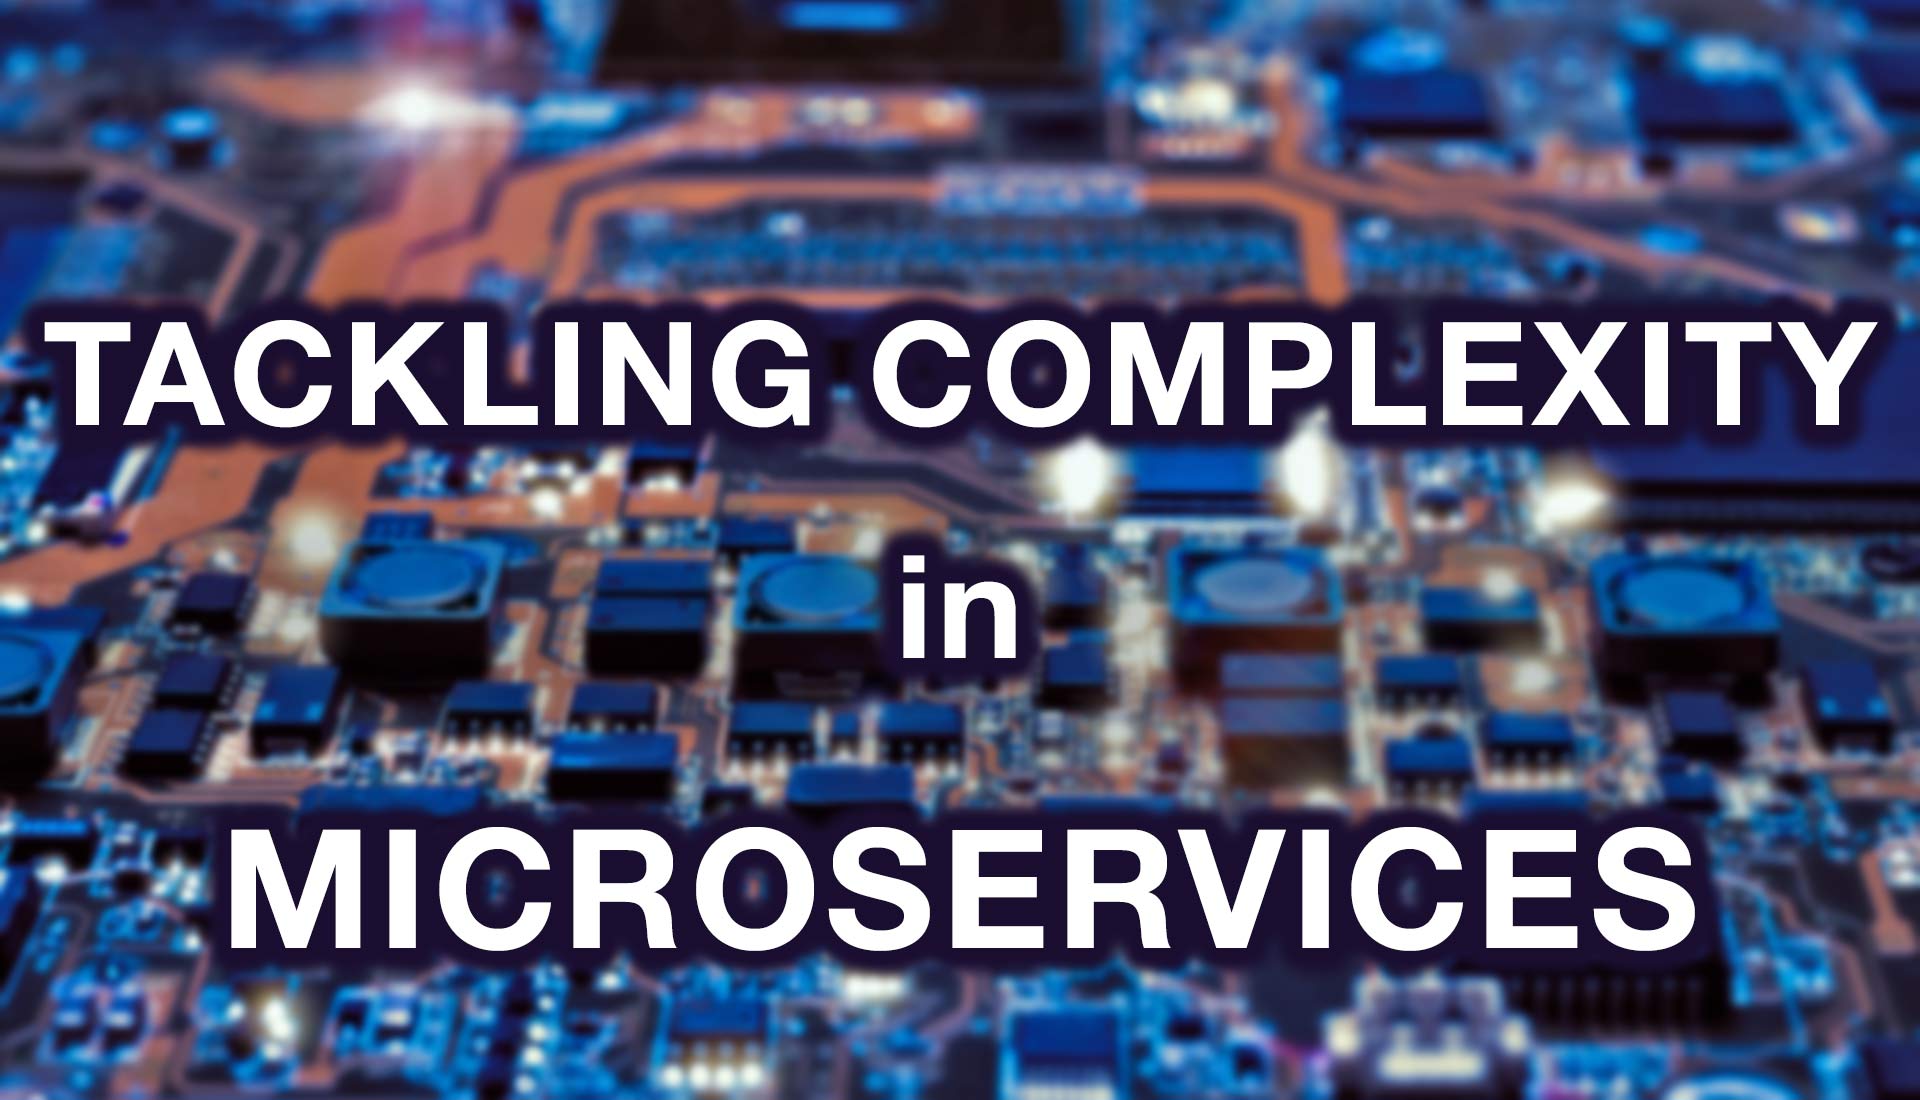 Tackling Complexity in Microservices